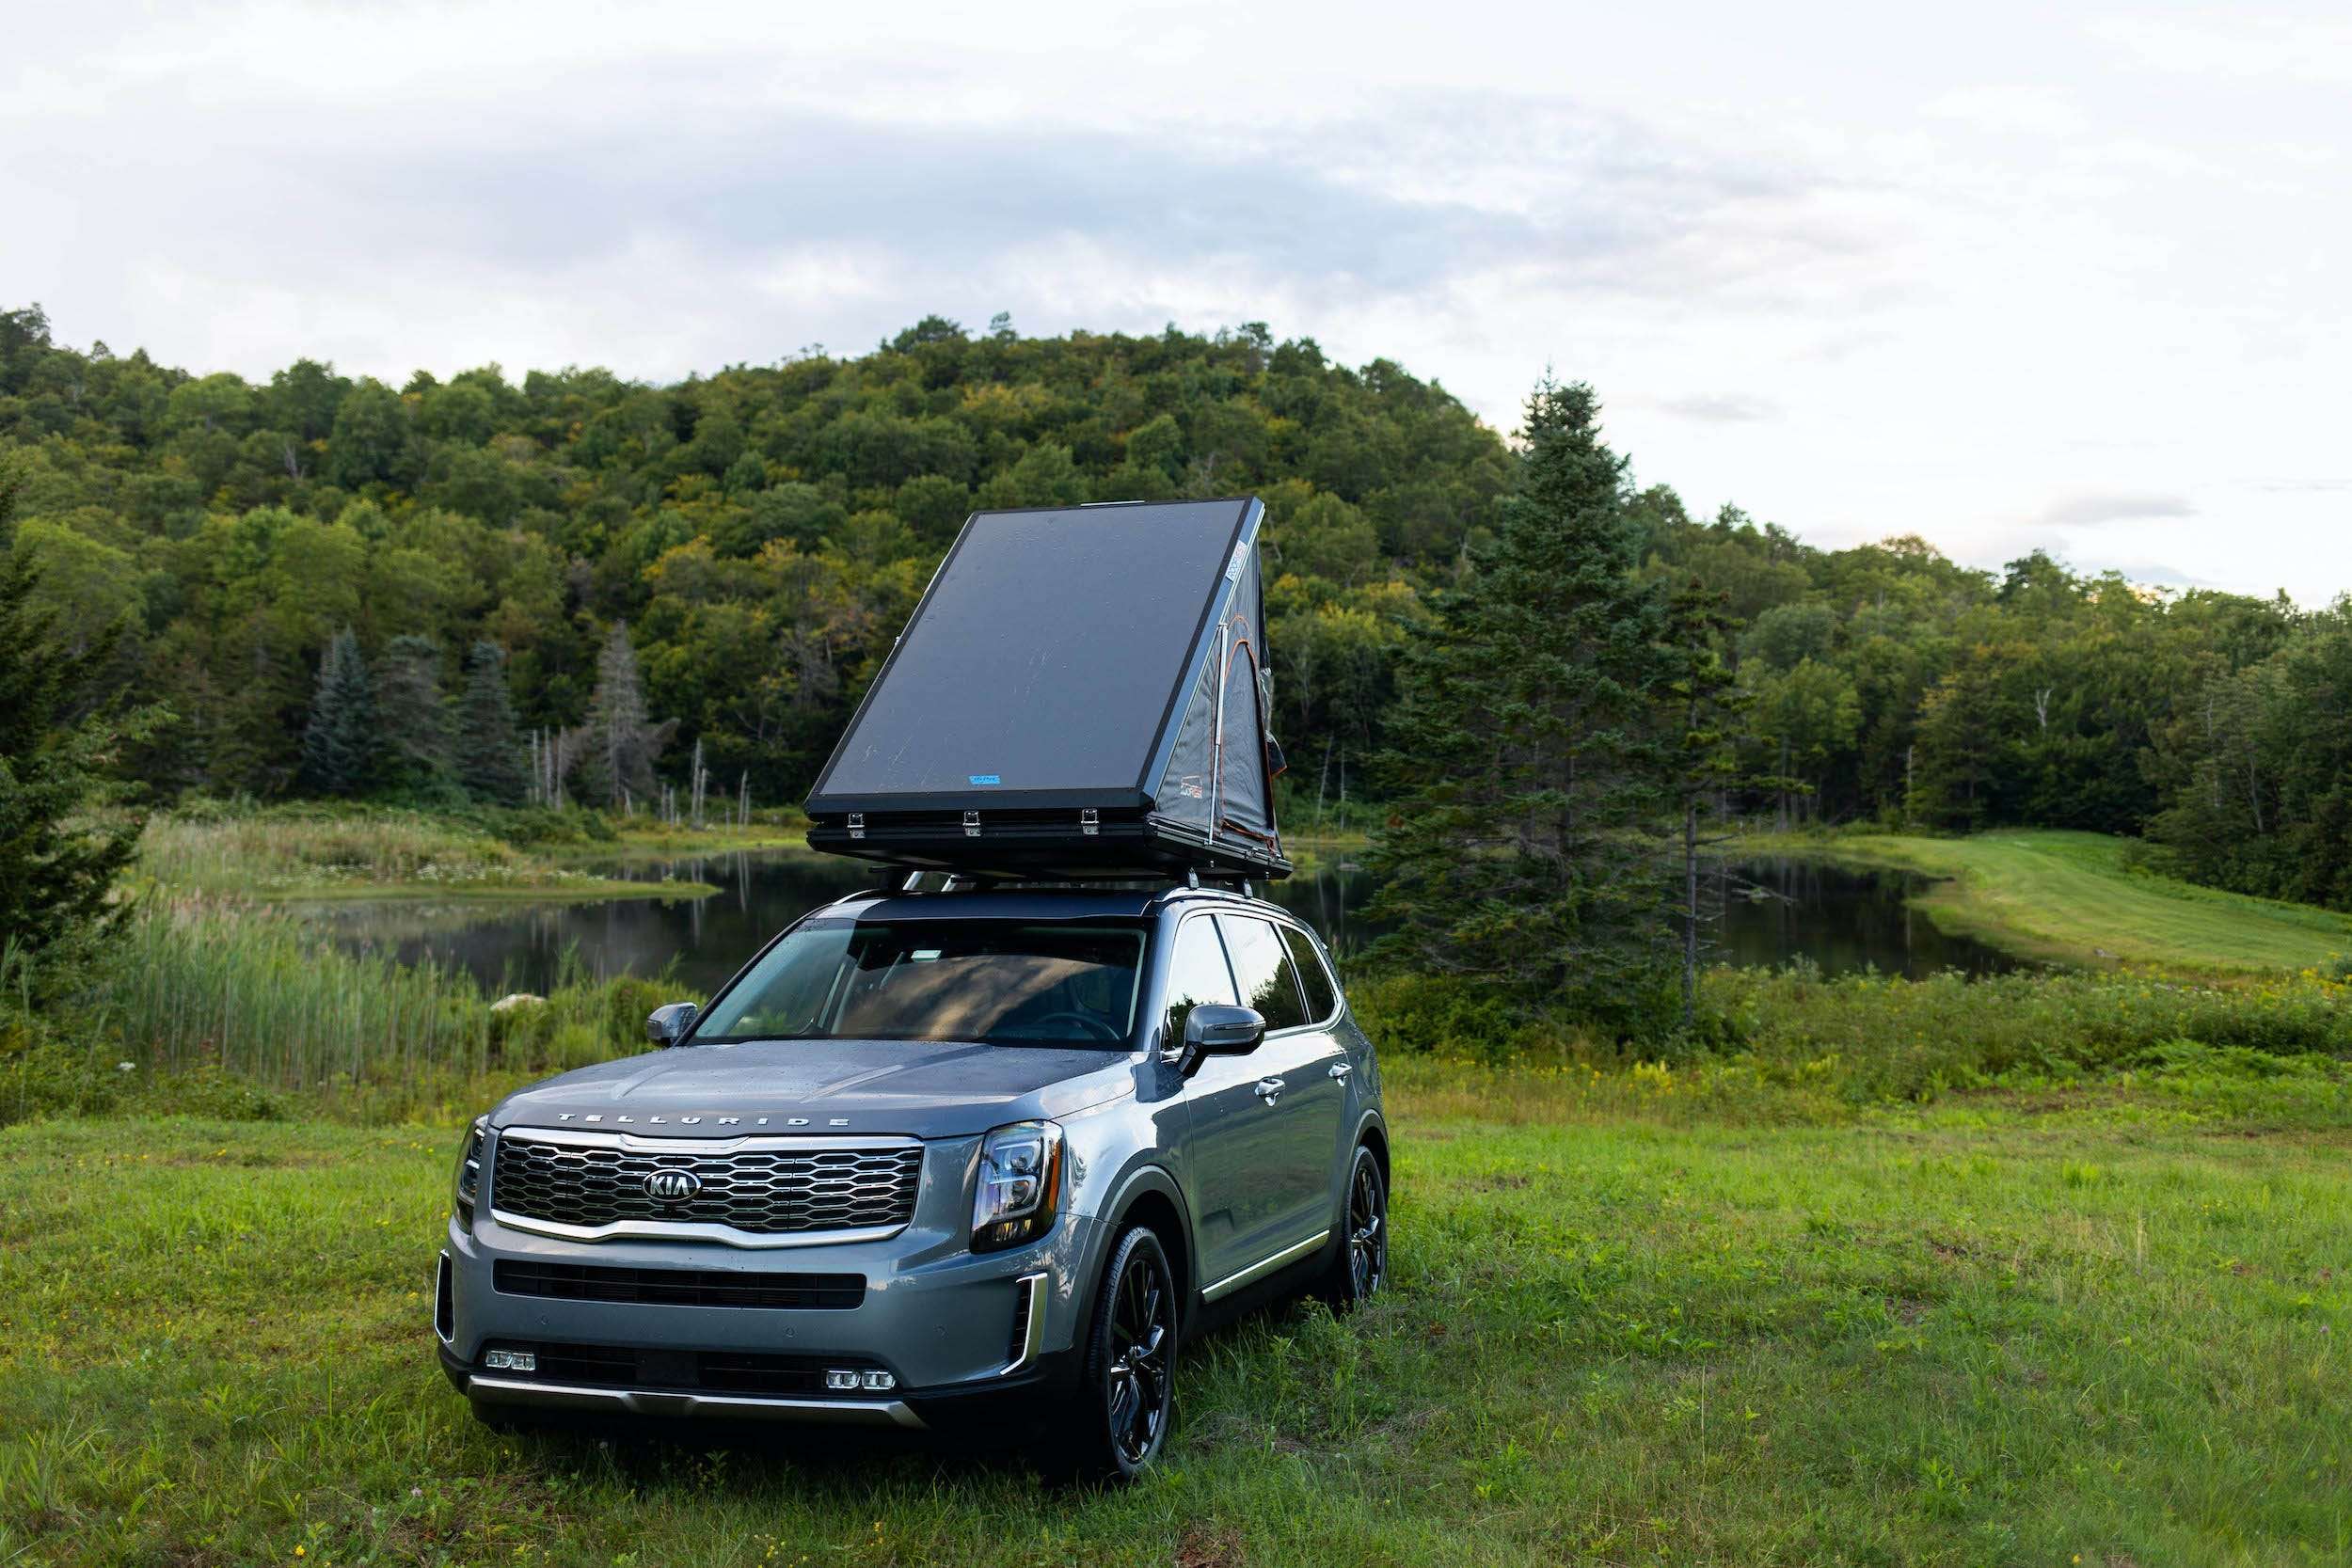 I slept in the Kia Telluride's 3,400 roof tent and it made camping fun